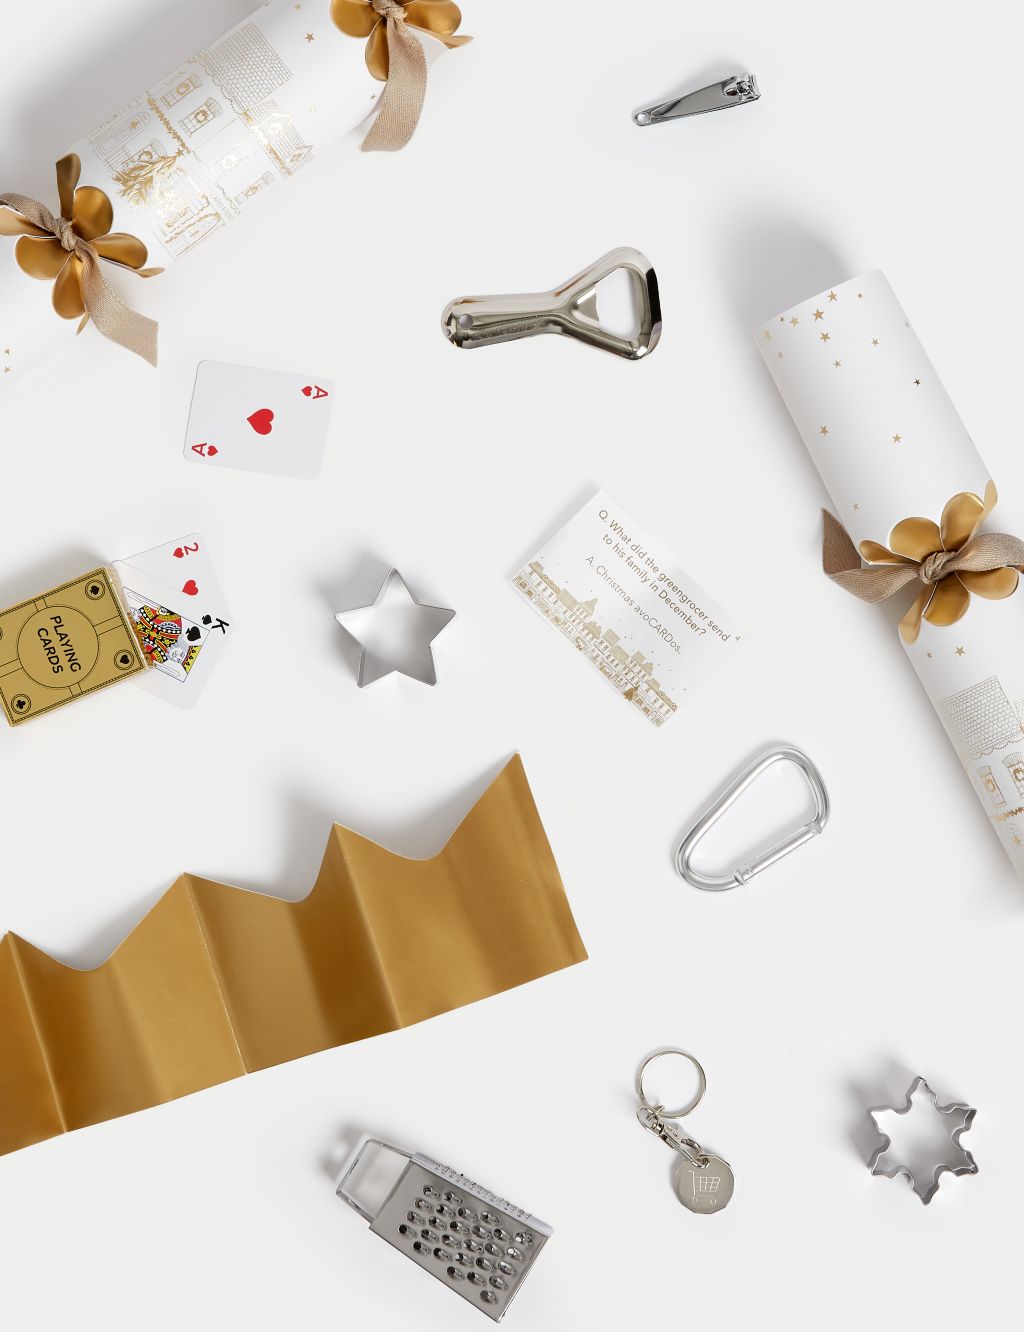 Luxury Christmas Crackers -  Gold Design 1 of 4